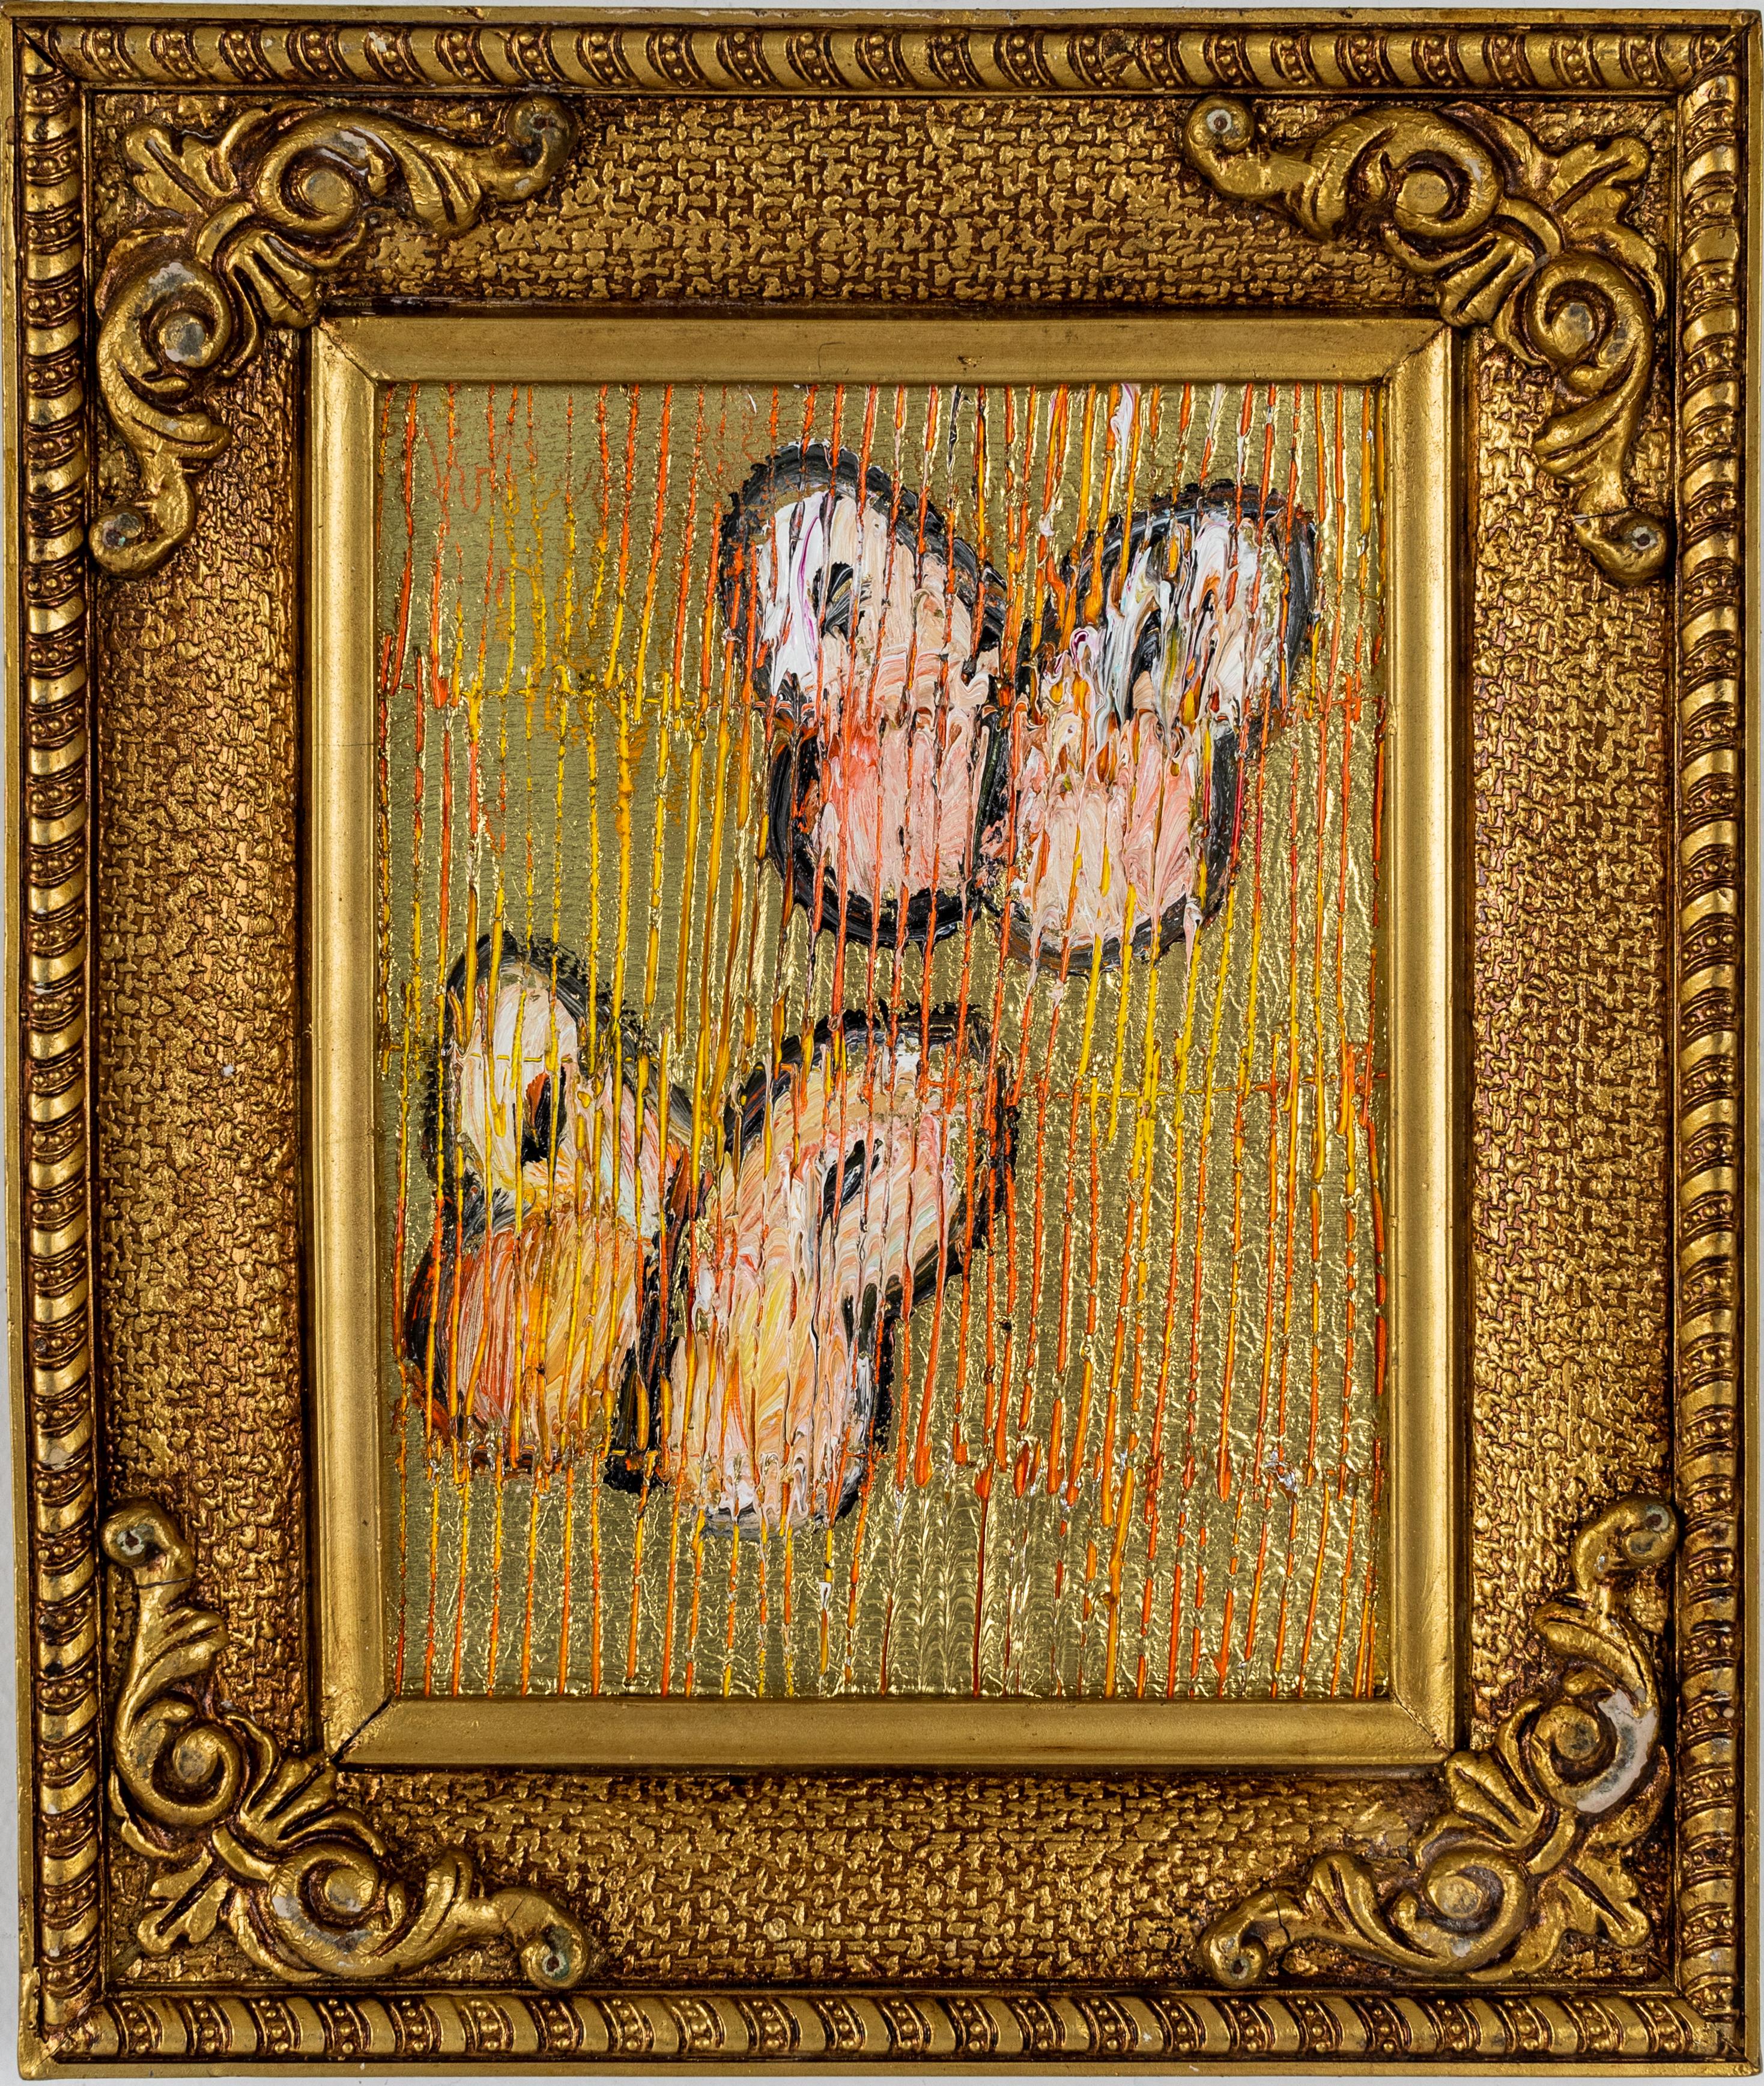 Hunt Slonem "Untitled" Gold Metallic Butterflies
Orange, yellow, and white butterflies on a gold metallic scored background in an antique frame

Unframed: 10 x 8 inches  
Framed: 16.5 x 14 inches
*Painting is framed - Please note that not all Hunt